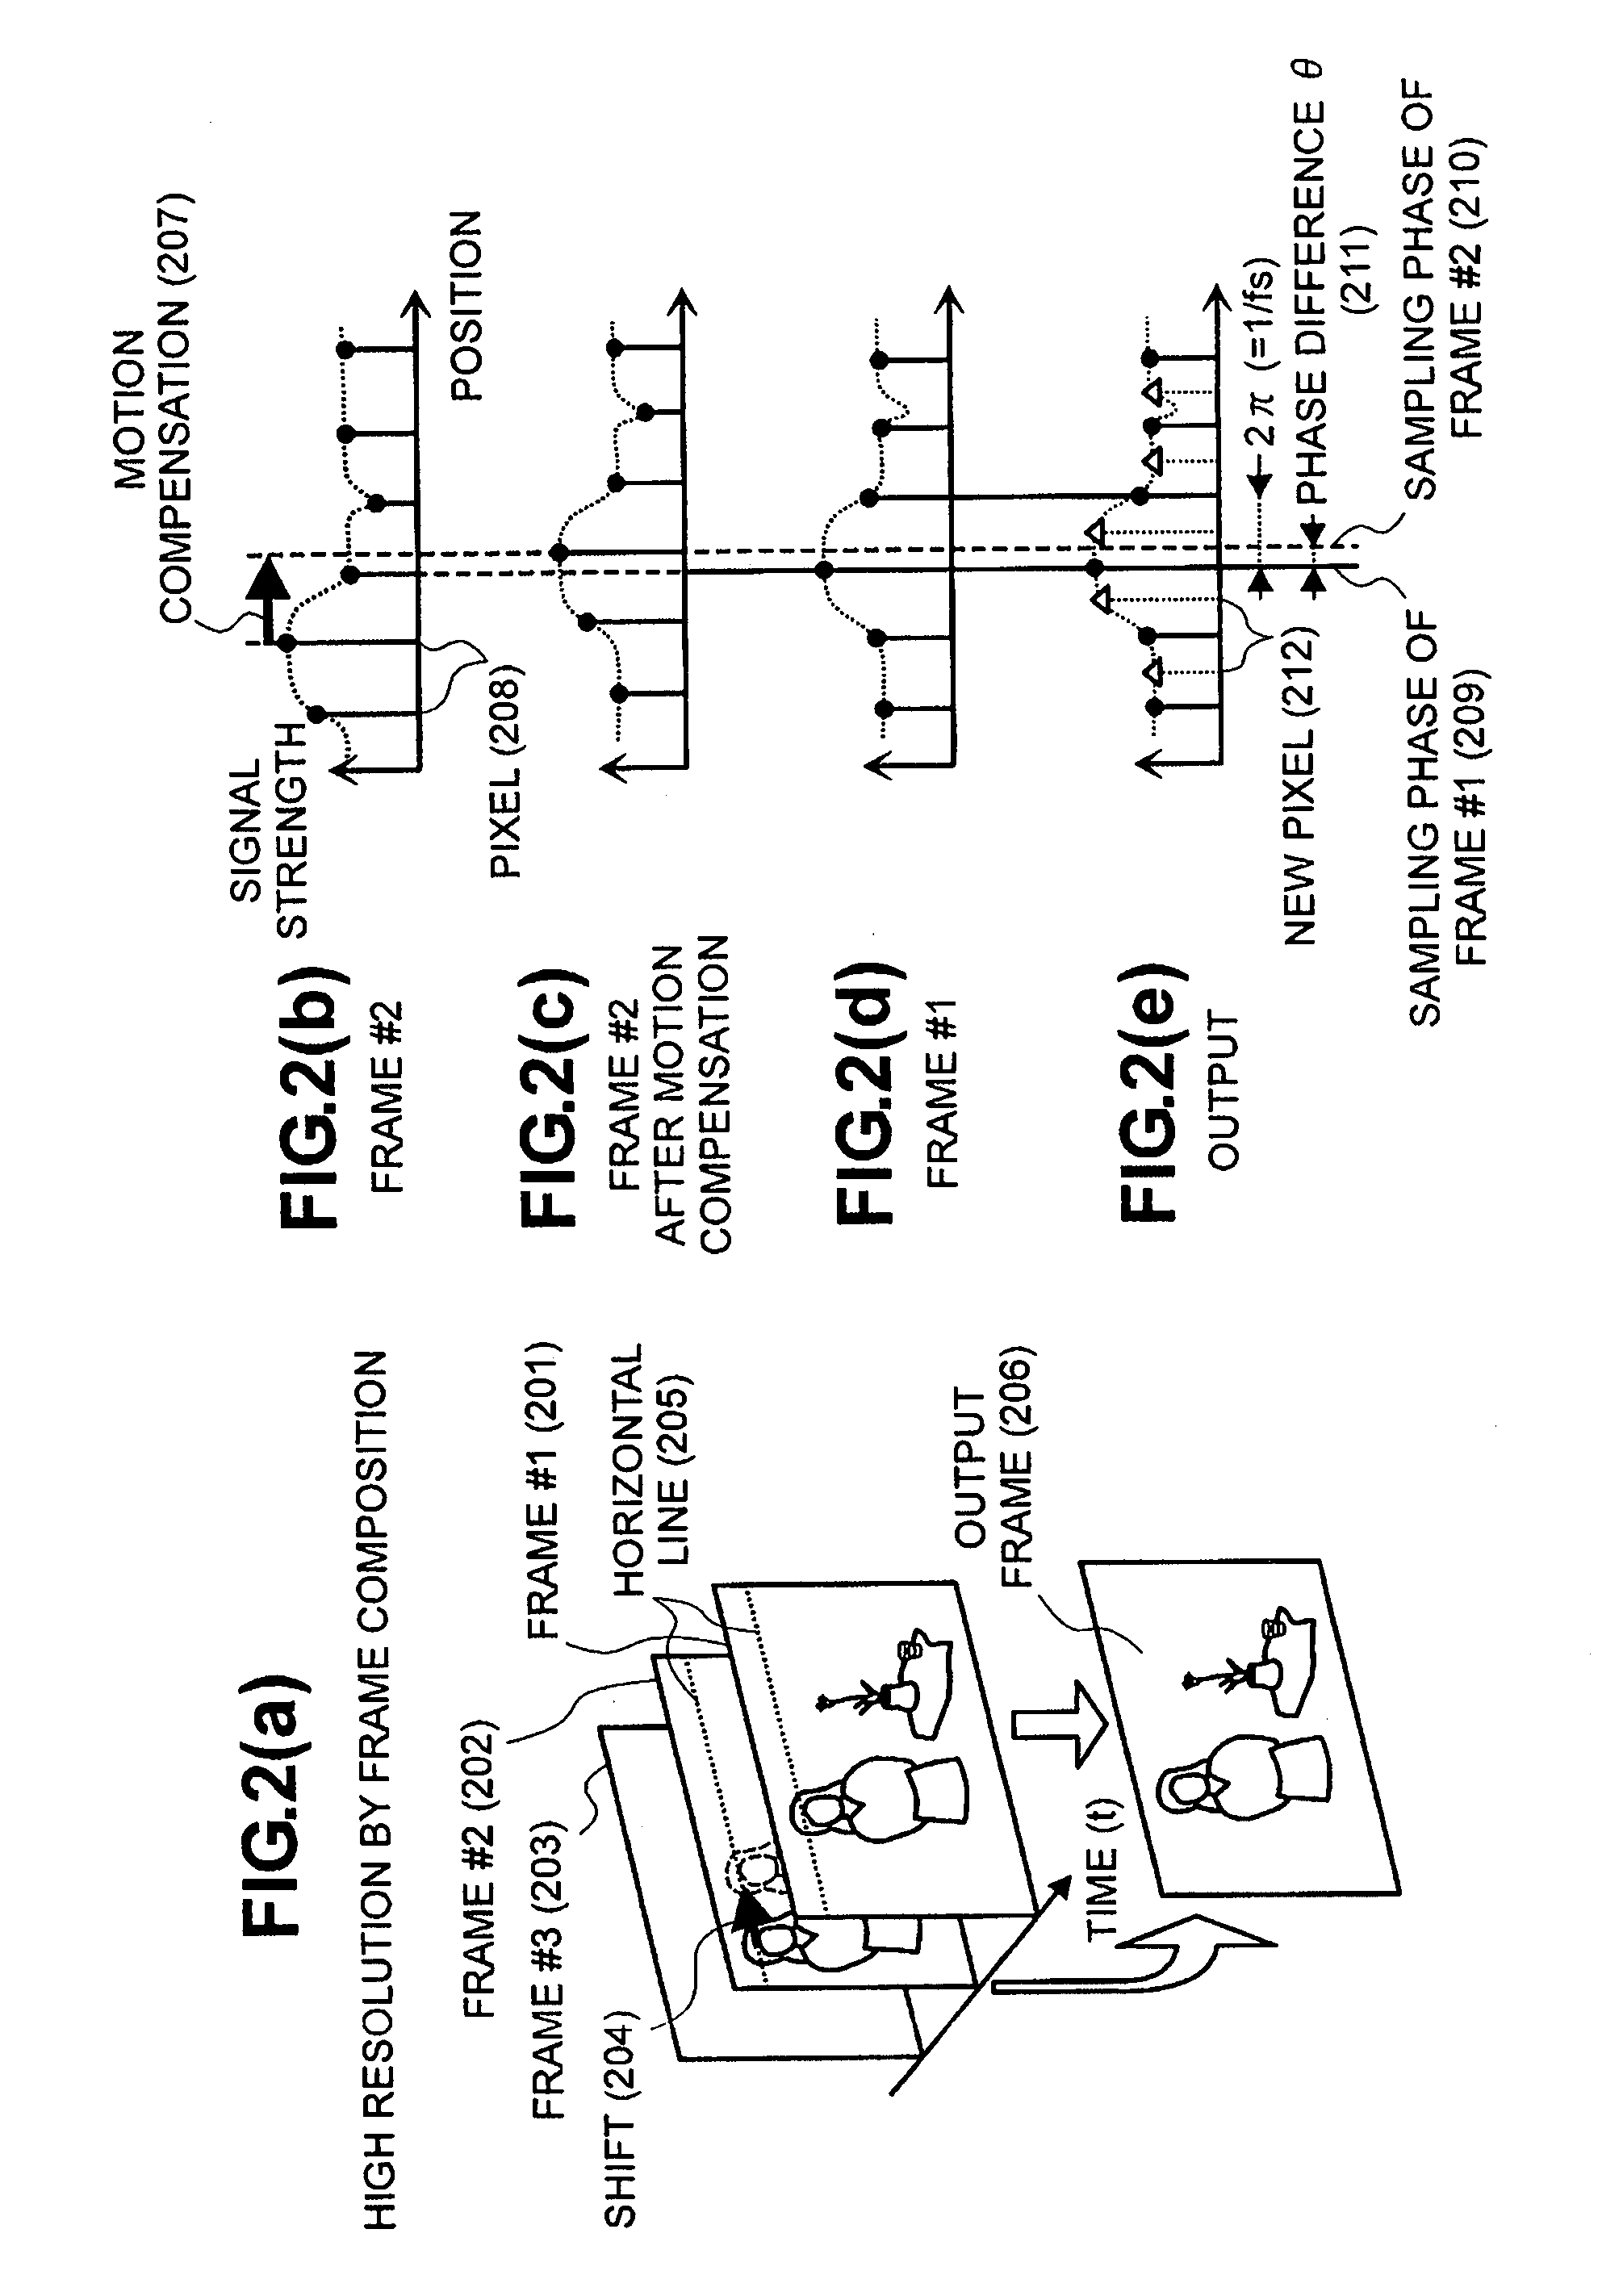 Video signal processing apparatus, video displaying apparatus and high resolution method for video signal